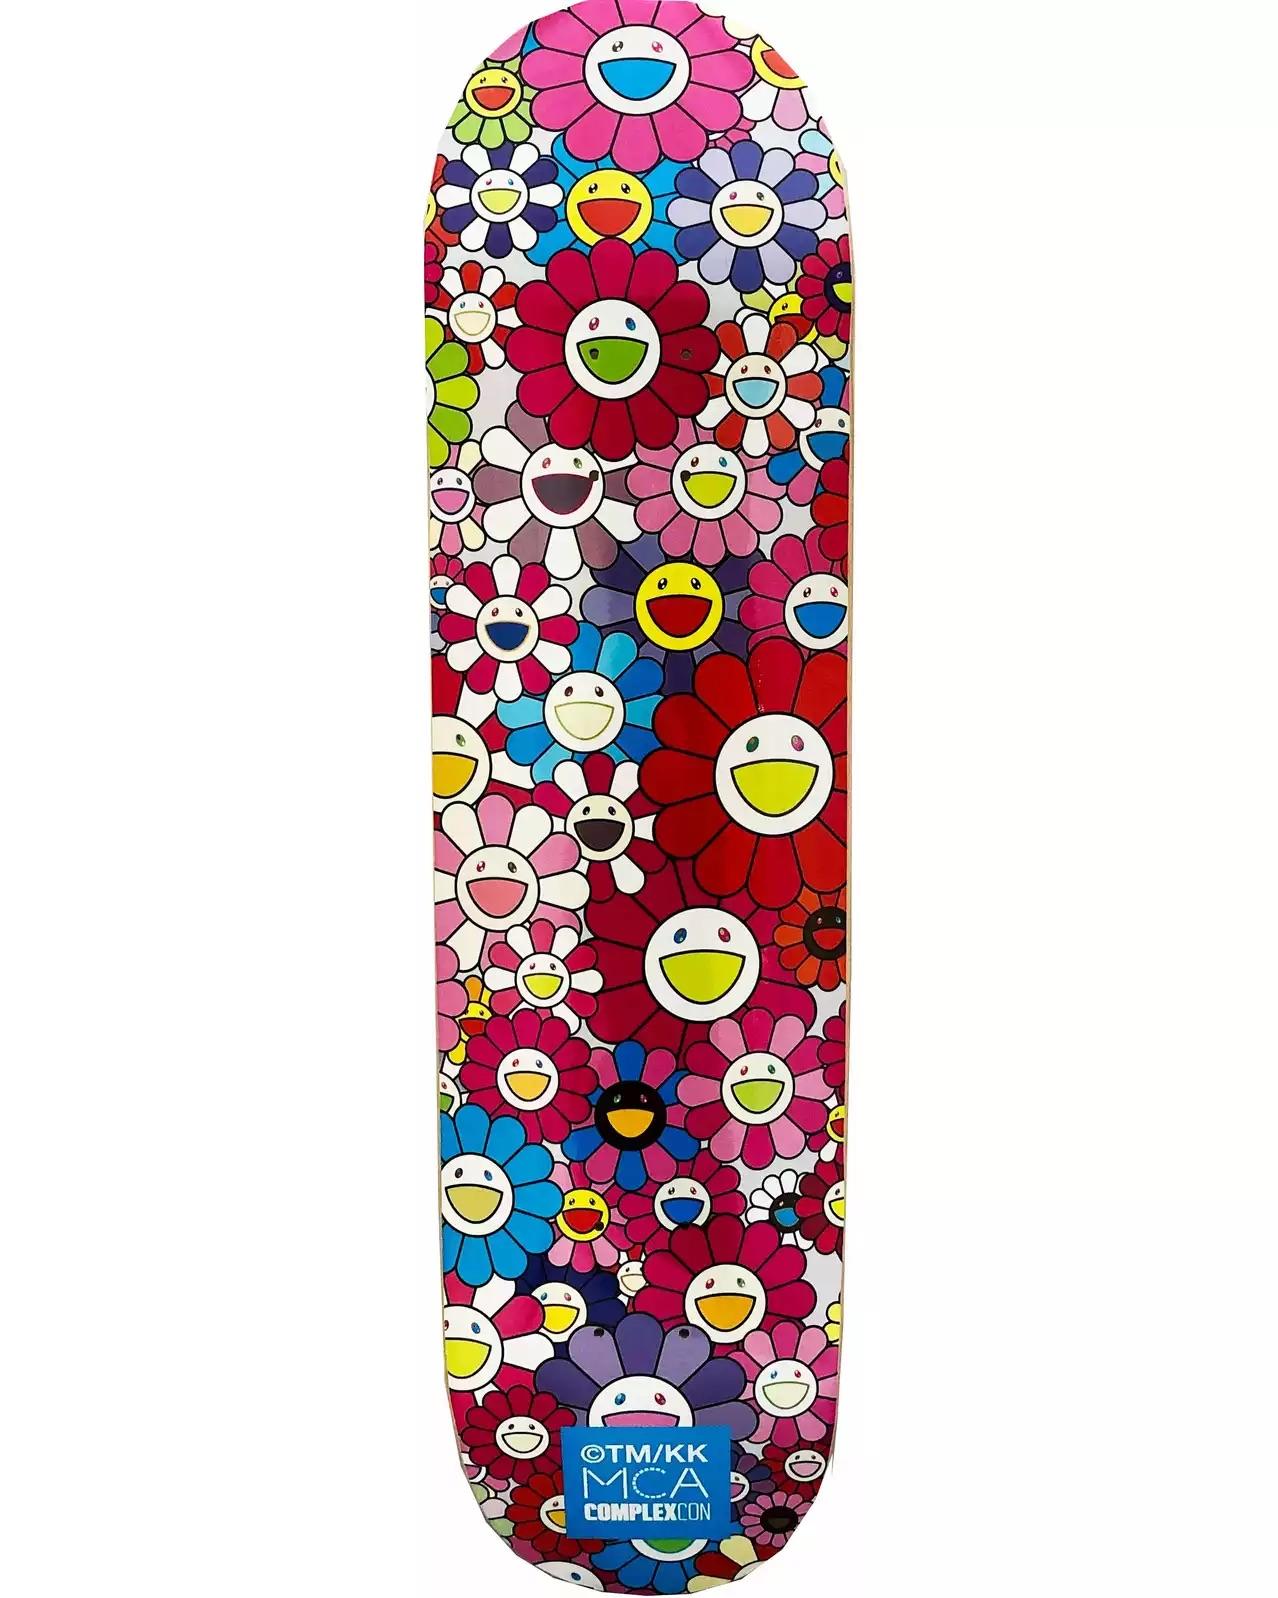 Takashi Murakami Flowers Skate Deck:
A vibrant piece of Takashi Murakami wall art produced as a limited series in conjunction with the 2017 Murakami exhibit: The Octopus Eats Its Own Leg, MCA Chicago. This deck is new in its original packaging. A